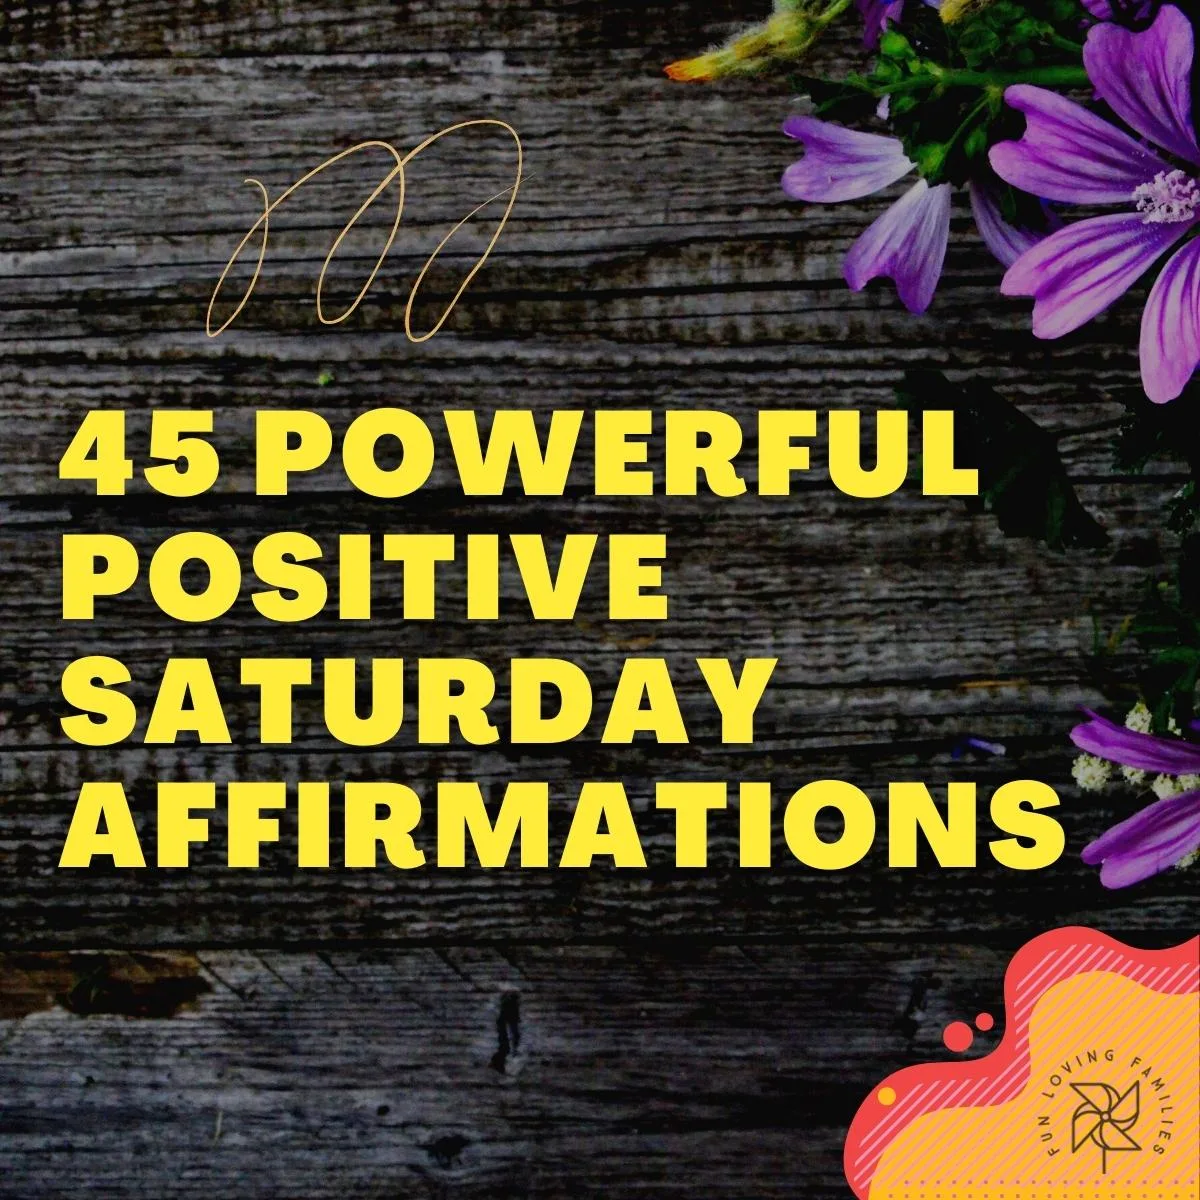 45 Powerful Positive Saturday Affirmations